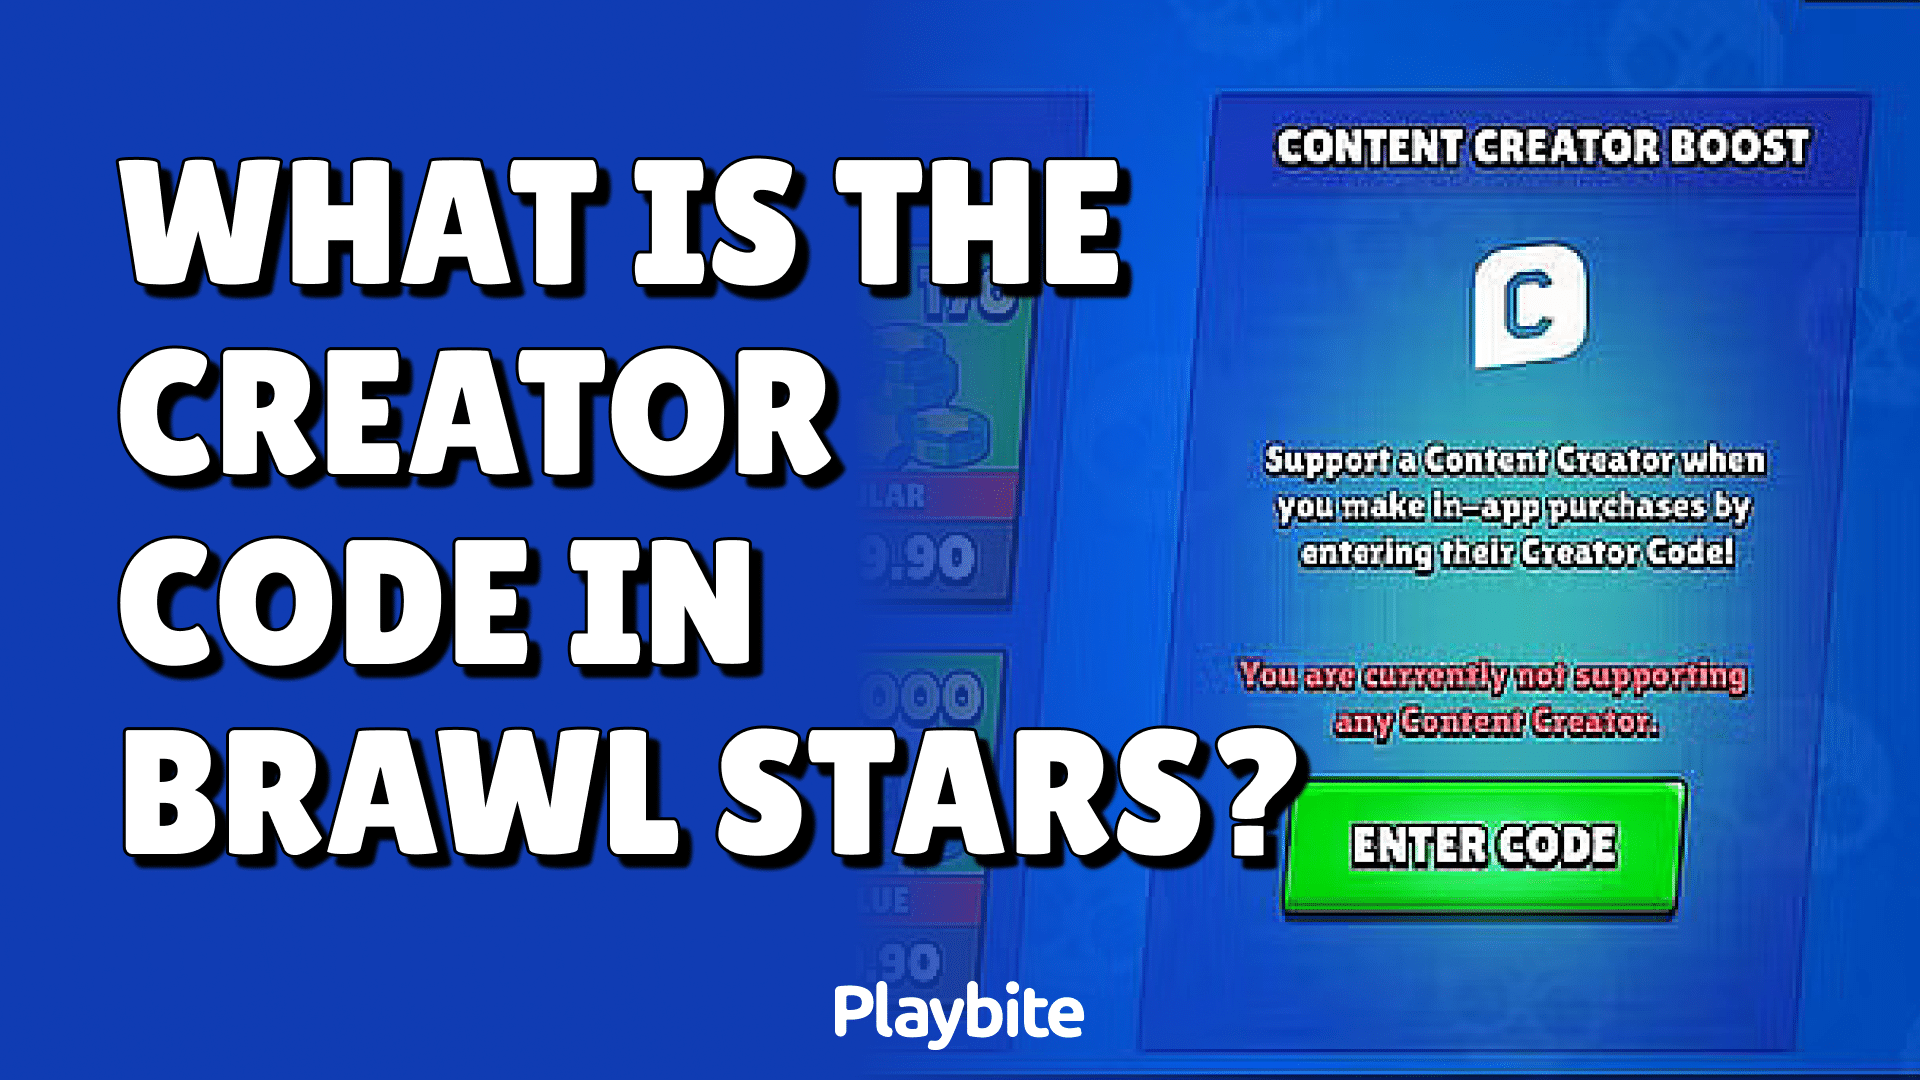 What Is The Creator Code In Brawl Stars?